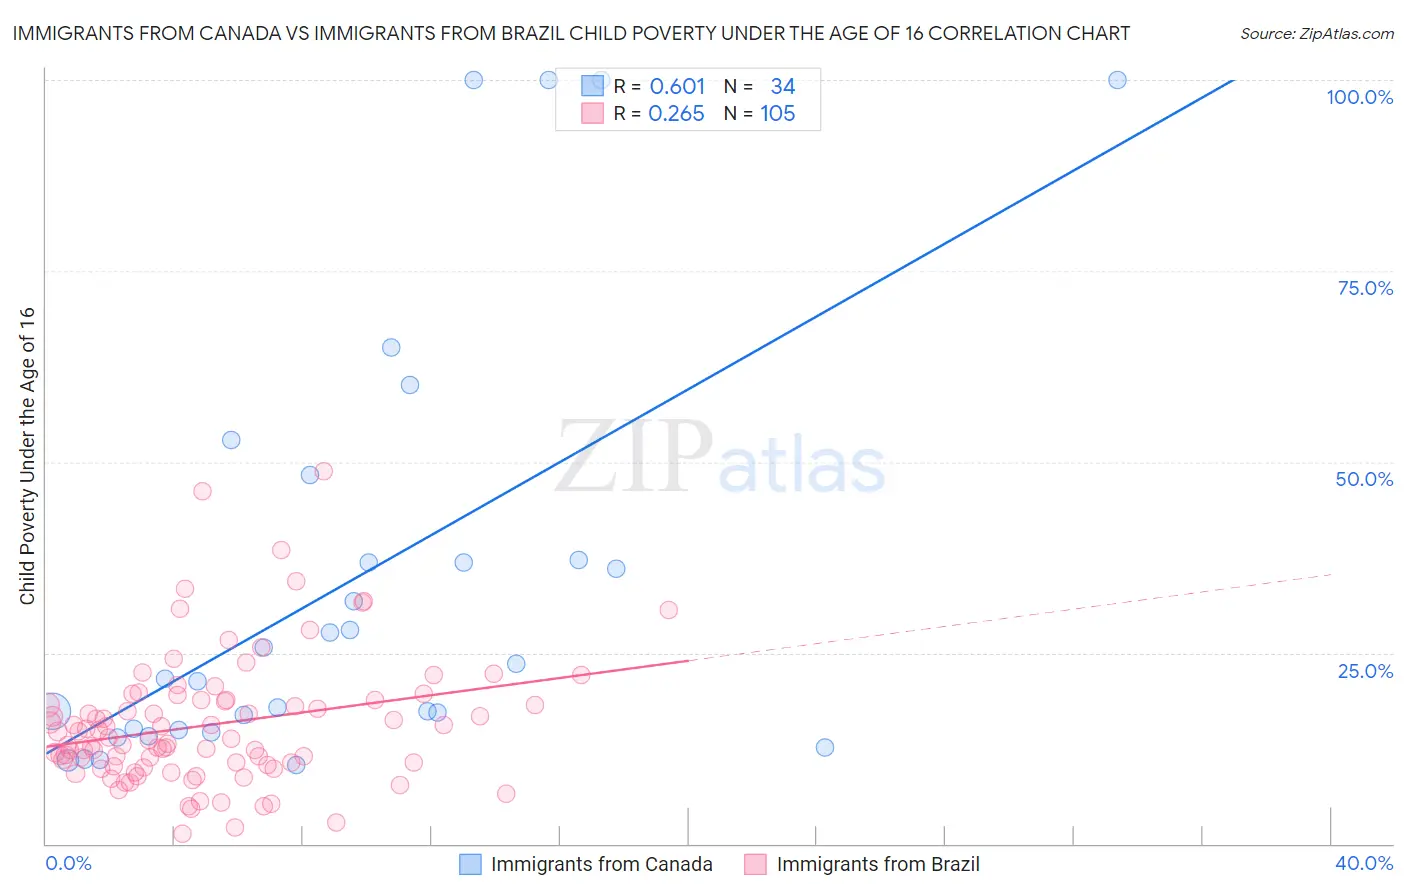 Immigrants from Canada vs Immigrants from Brazil Child Poverty Under the Age of 16